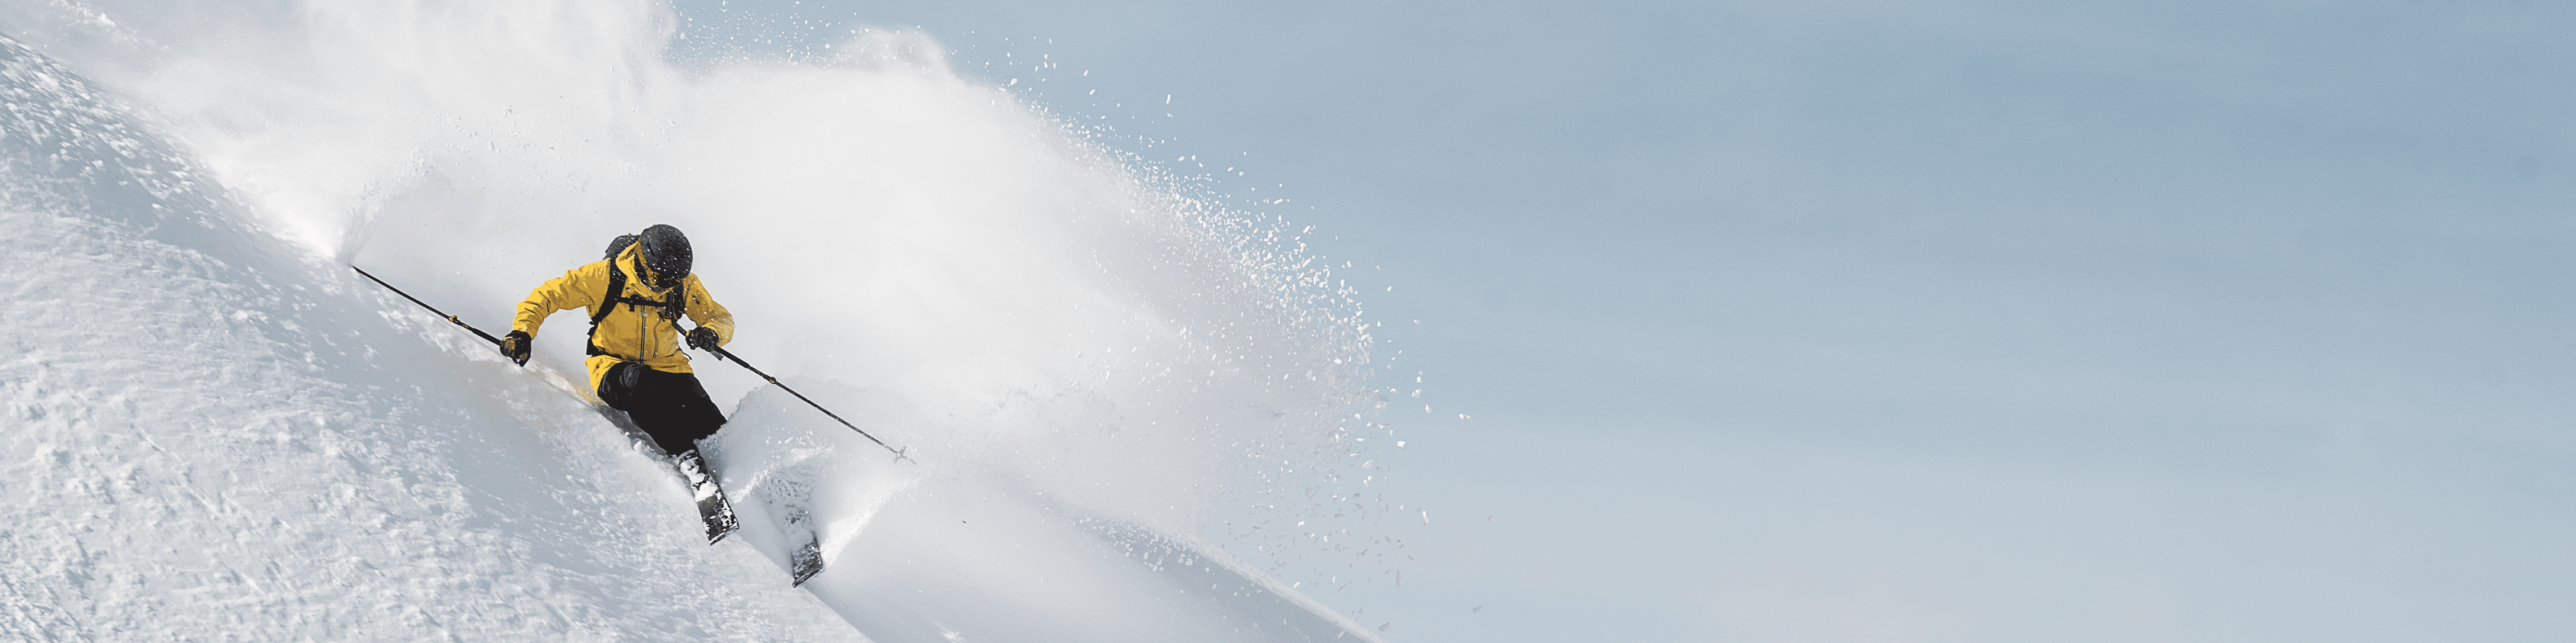 A freerider with a yellow jacket is zooming down a powder snow slope